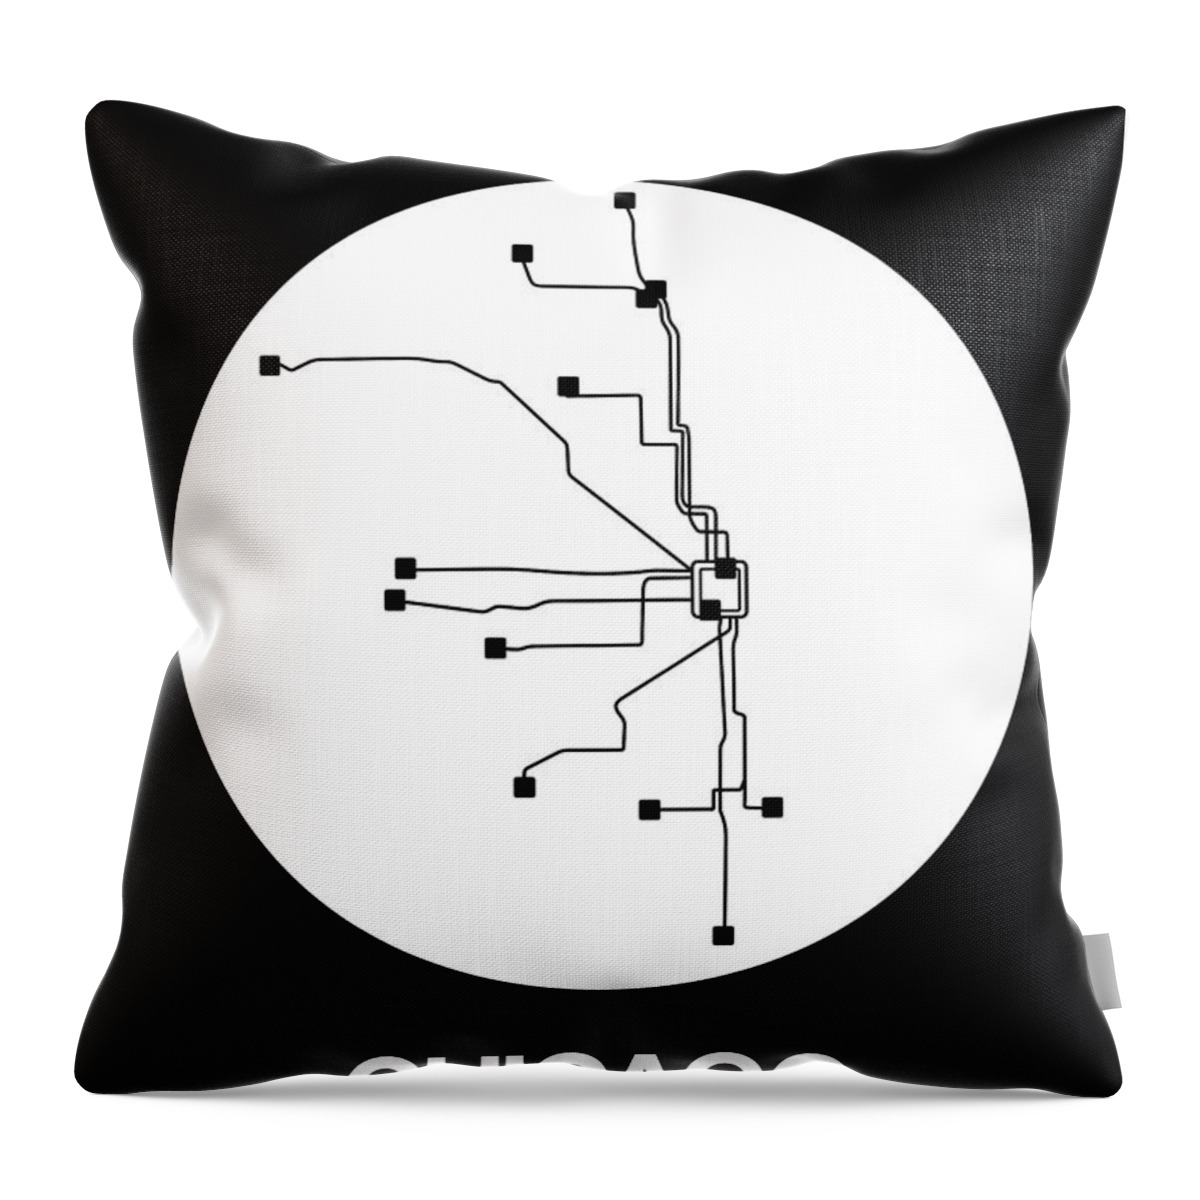 Chicago Throw Pillow featuring the digital art Chicago White Subway Map by Naxart Studio